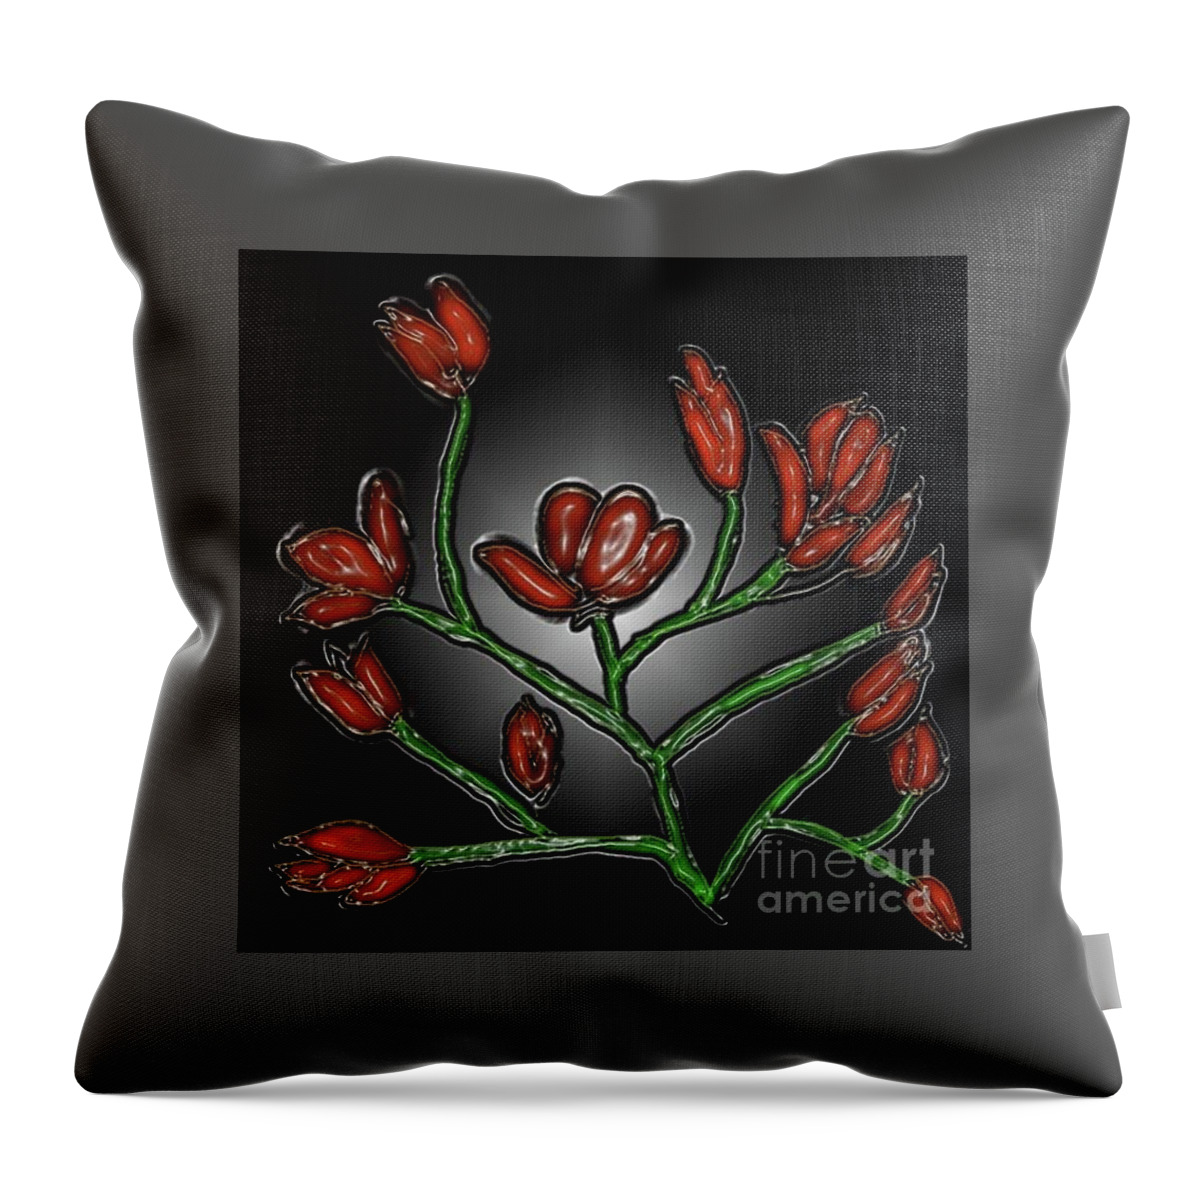 Red Flower Throw Pillow featuring the digital art Red Blossom by Latha Gokuldas Panicker